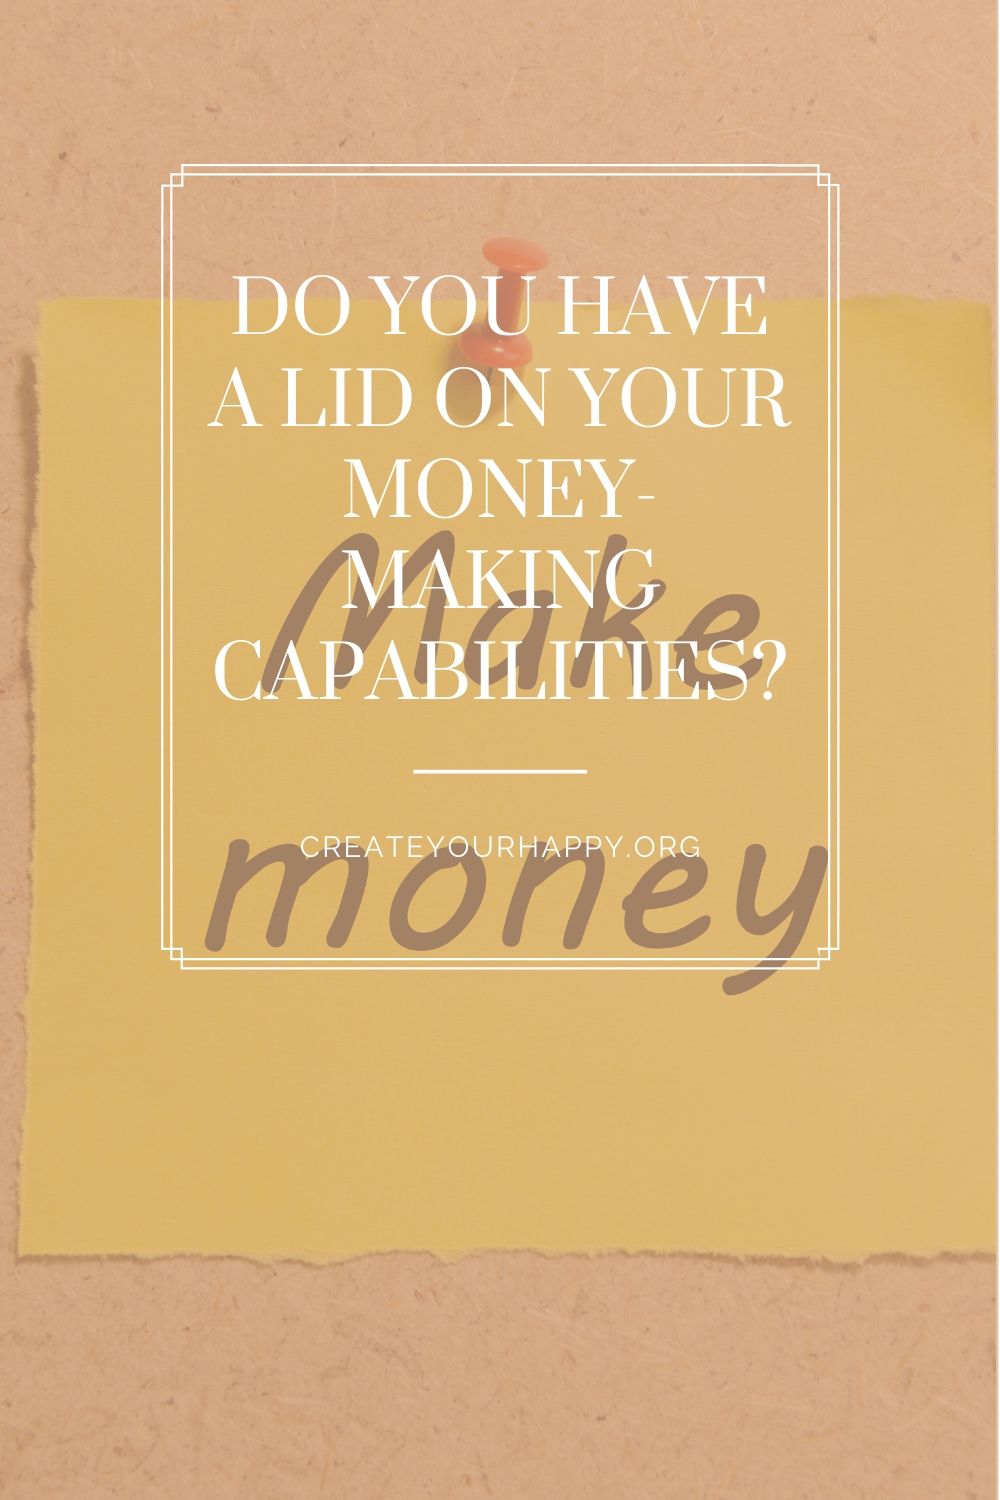 Do You Have a Lid on Your Money-Making Capabilities?